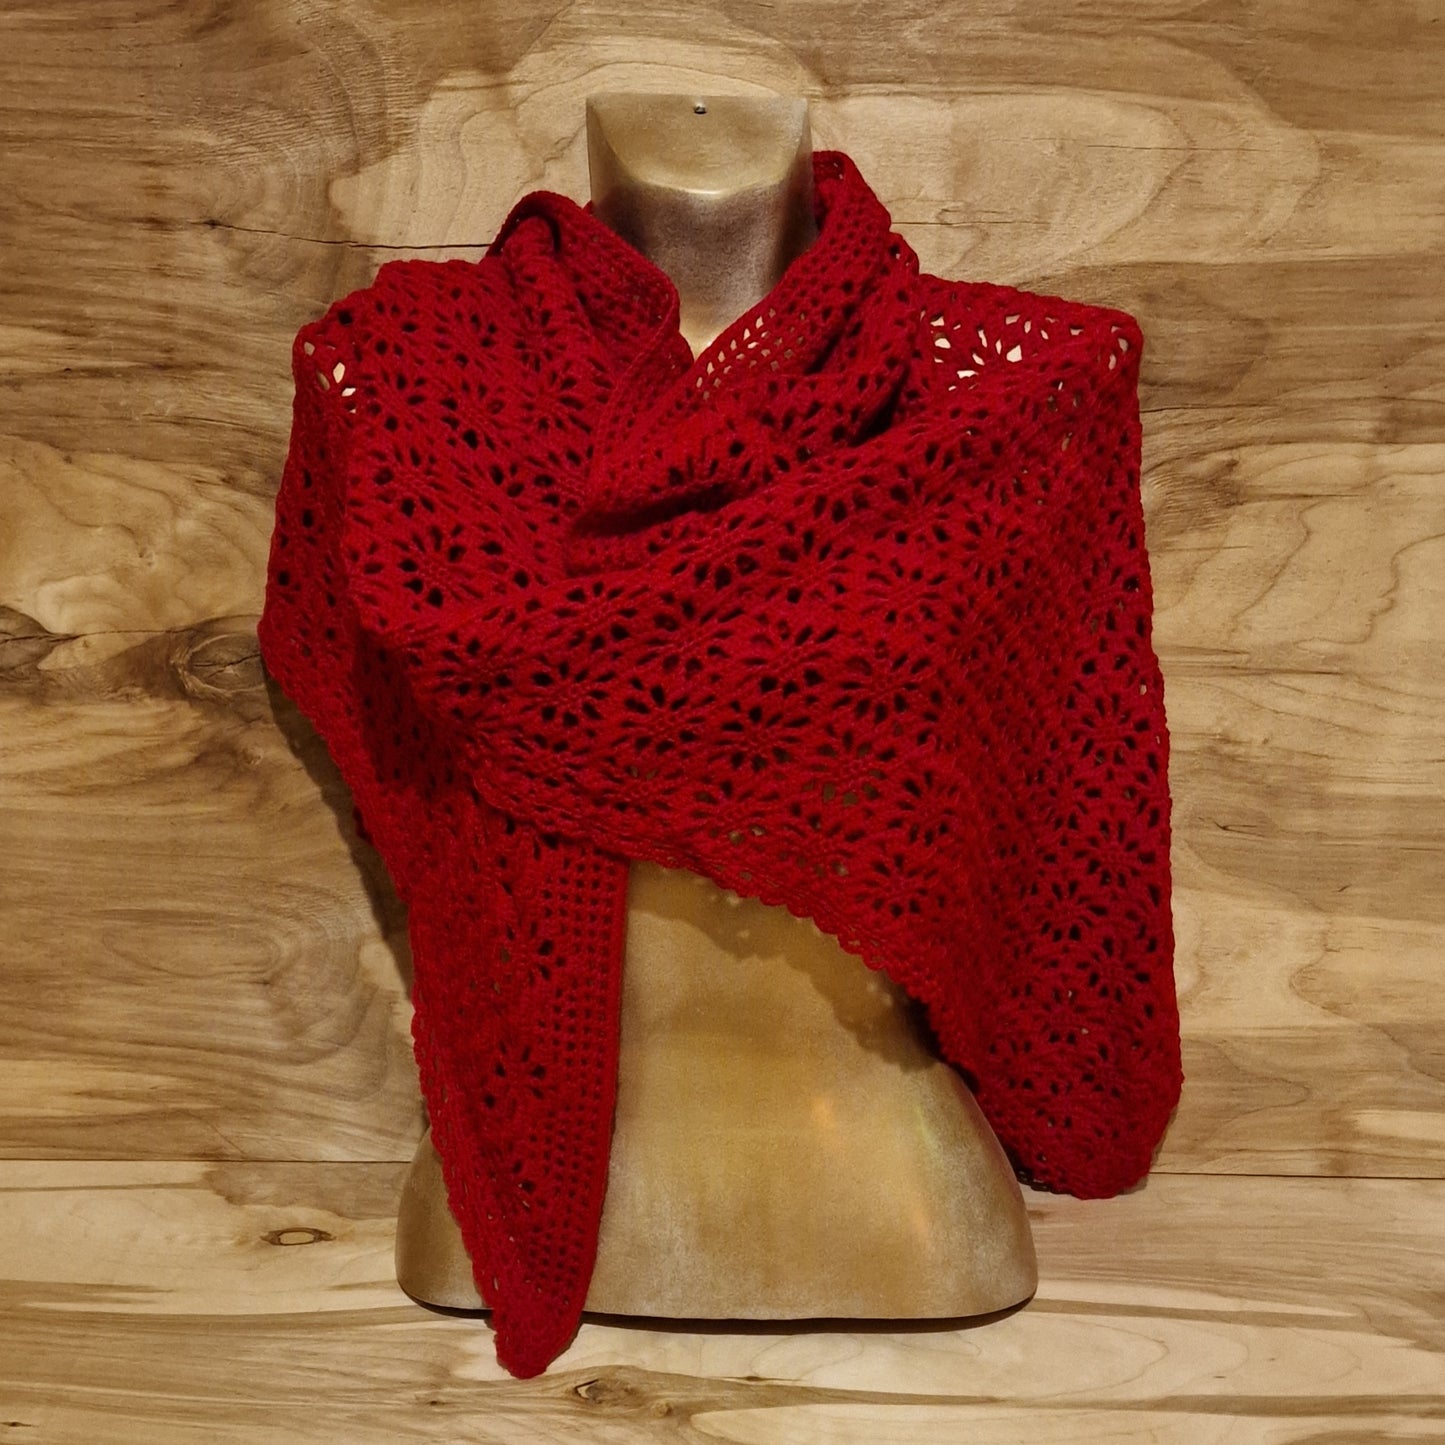 Red crocheted scarf with floral pattern / widest edge 188 cm (INPO 55)